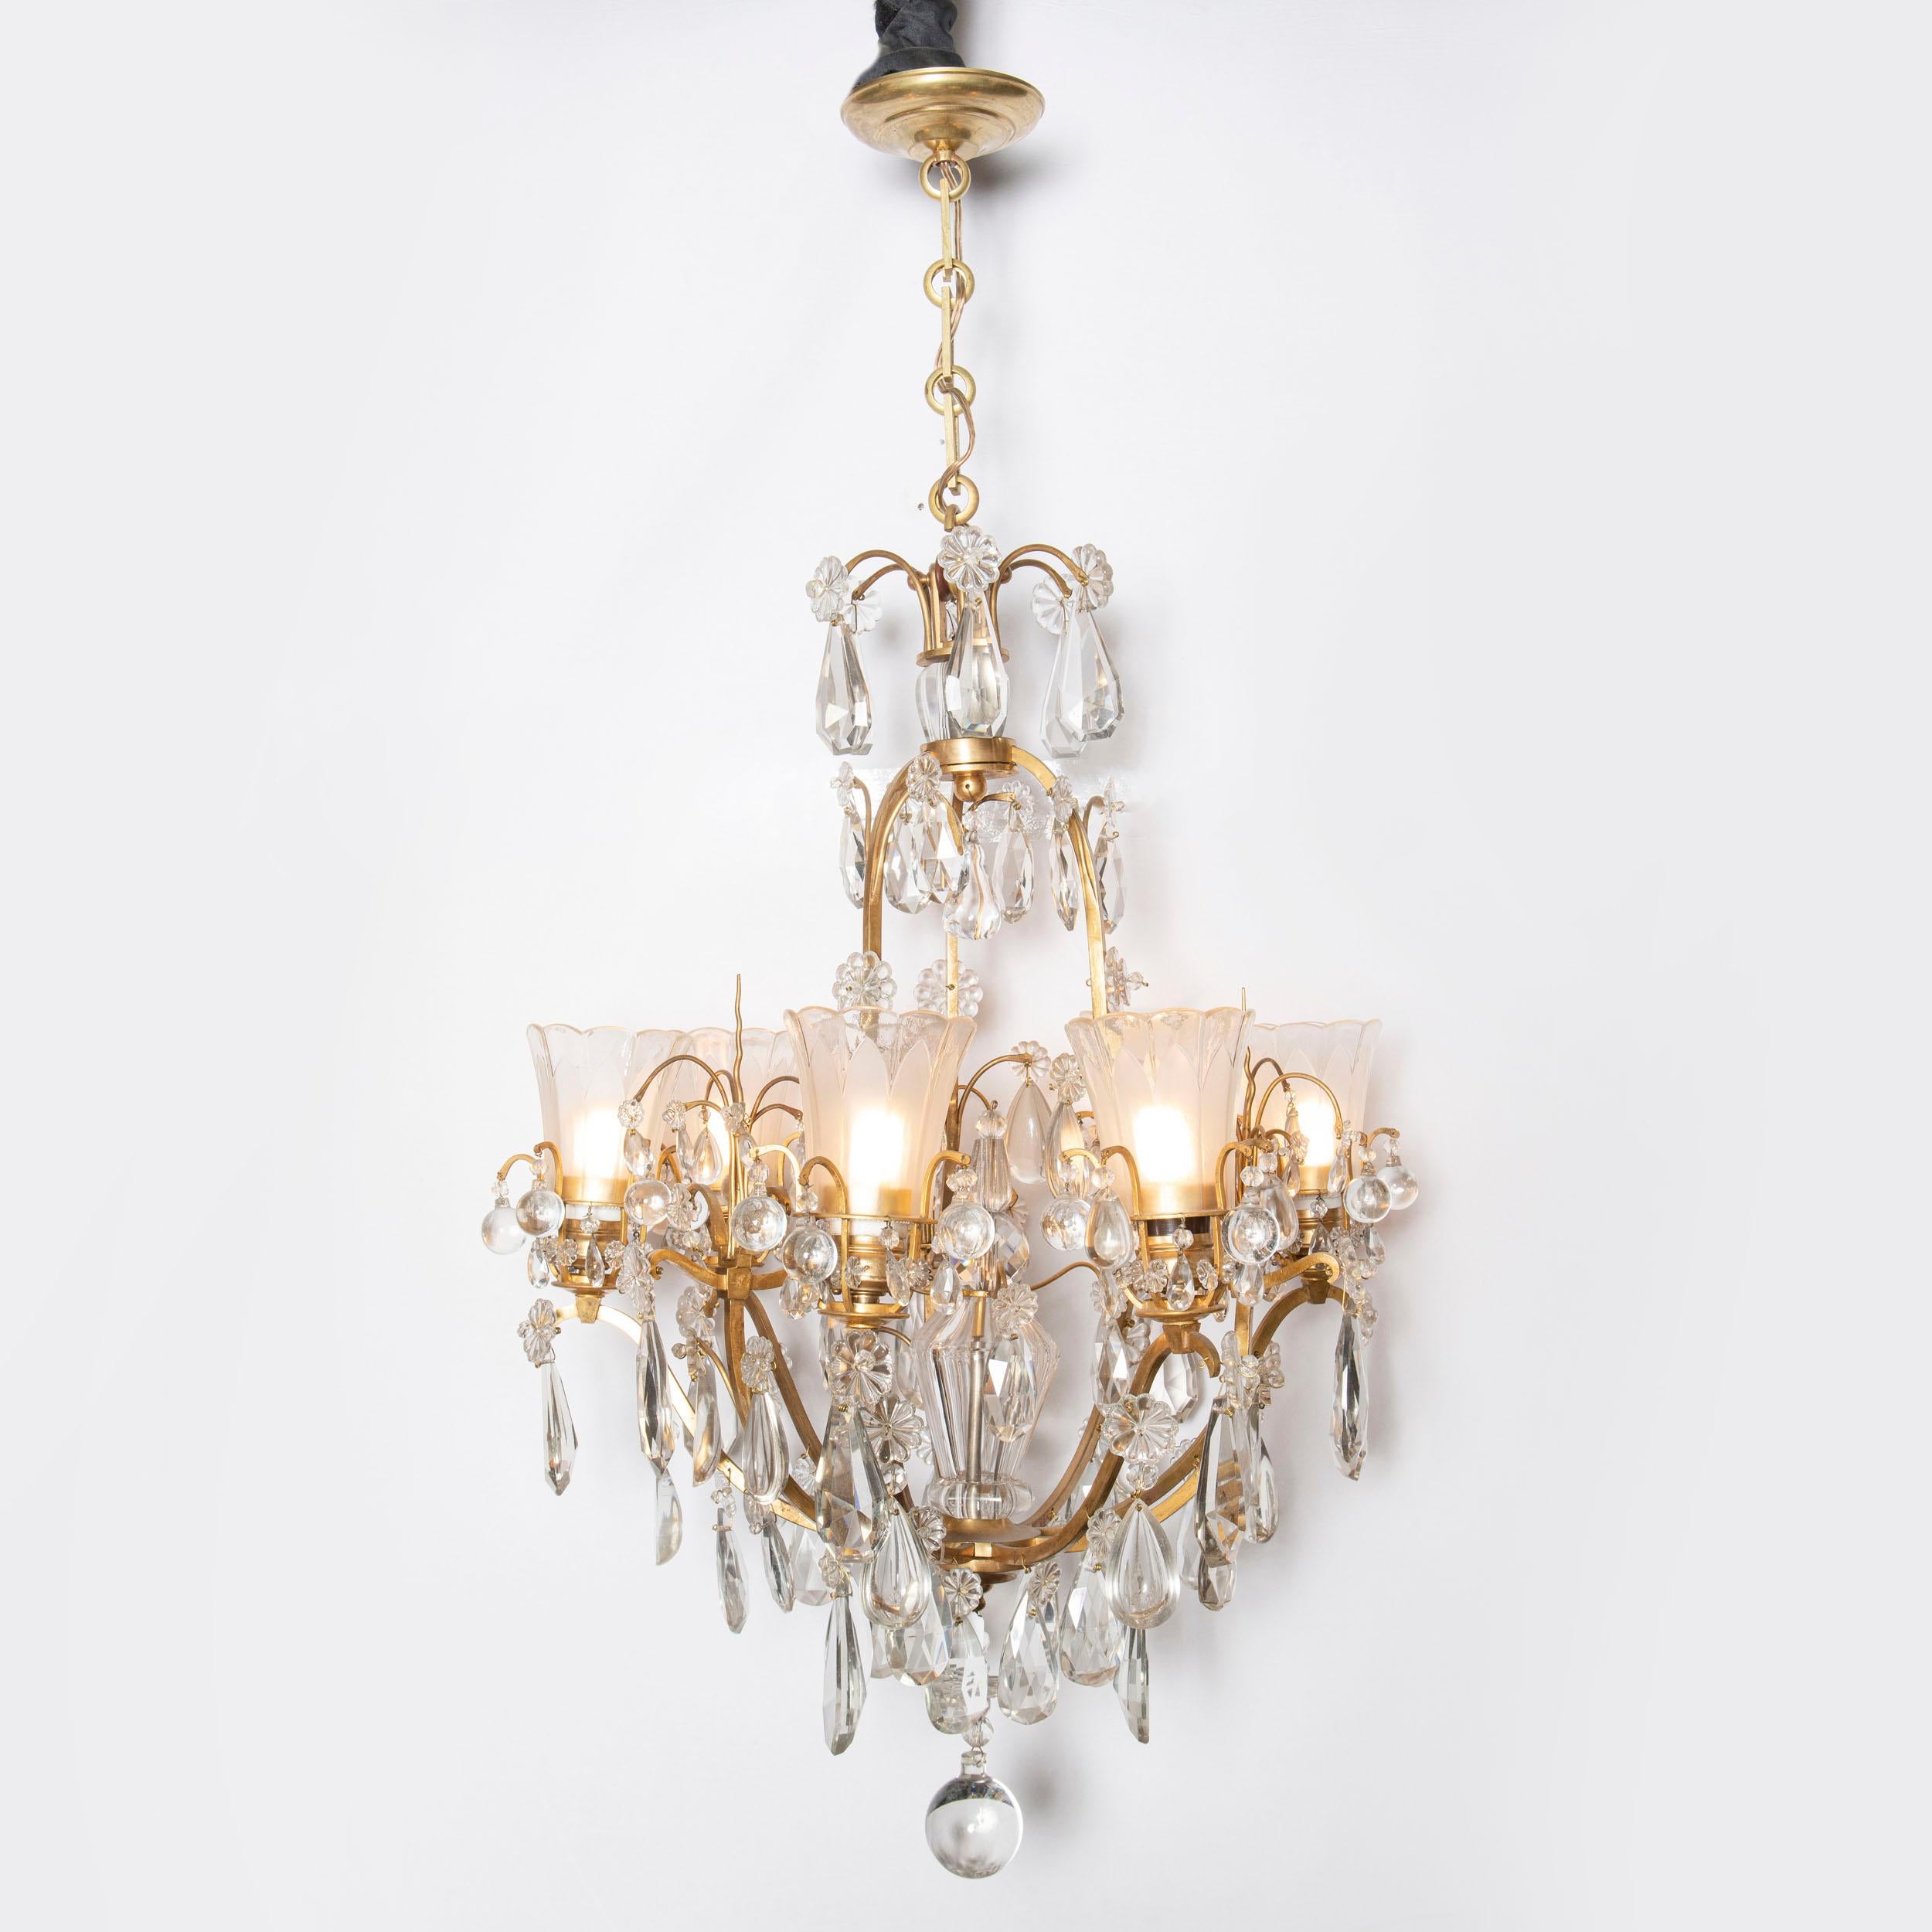 Pair of bronze and crystal chandeliers. France, circa 1940.
Attributed to Maison Jansen.